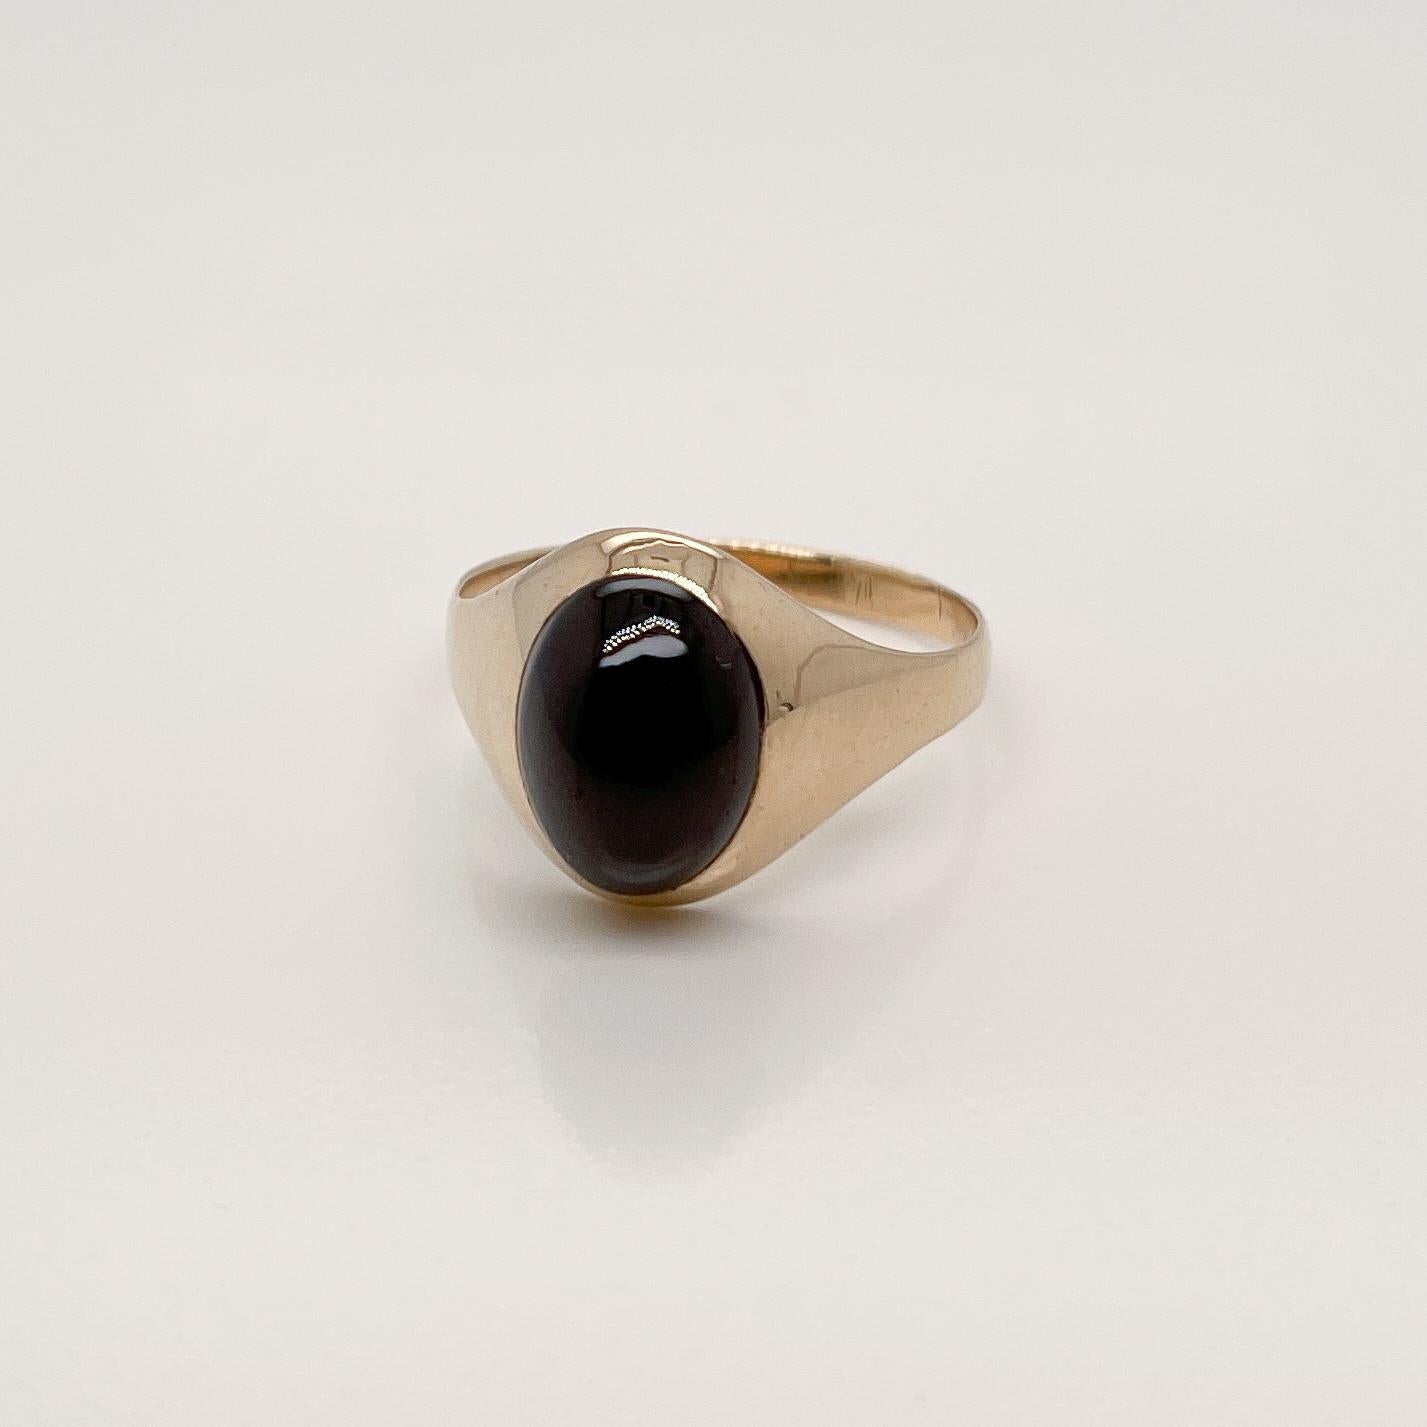 A very fine antique gold and garnet signet style ring.

Set with a large, dark oval garnet cabochon in 14k gold.

Simply a terrific ring!

Date:
20th Century

Overall Condition:
It is in overall good, as-pictured, used estate condition with some